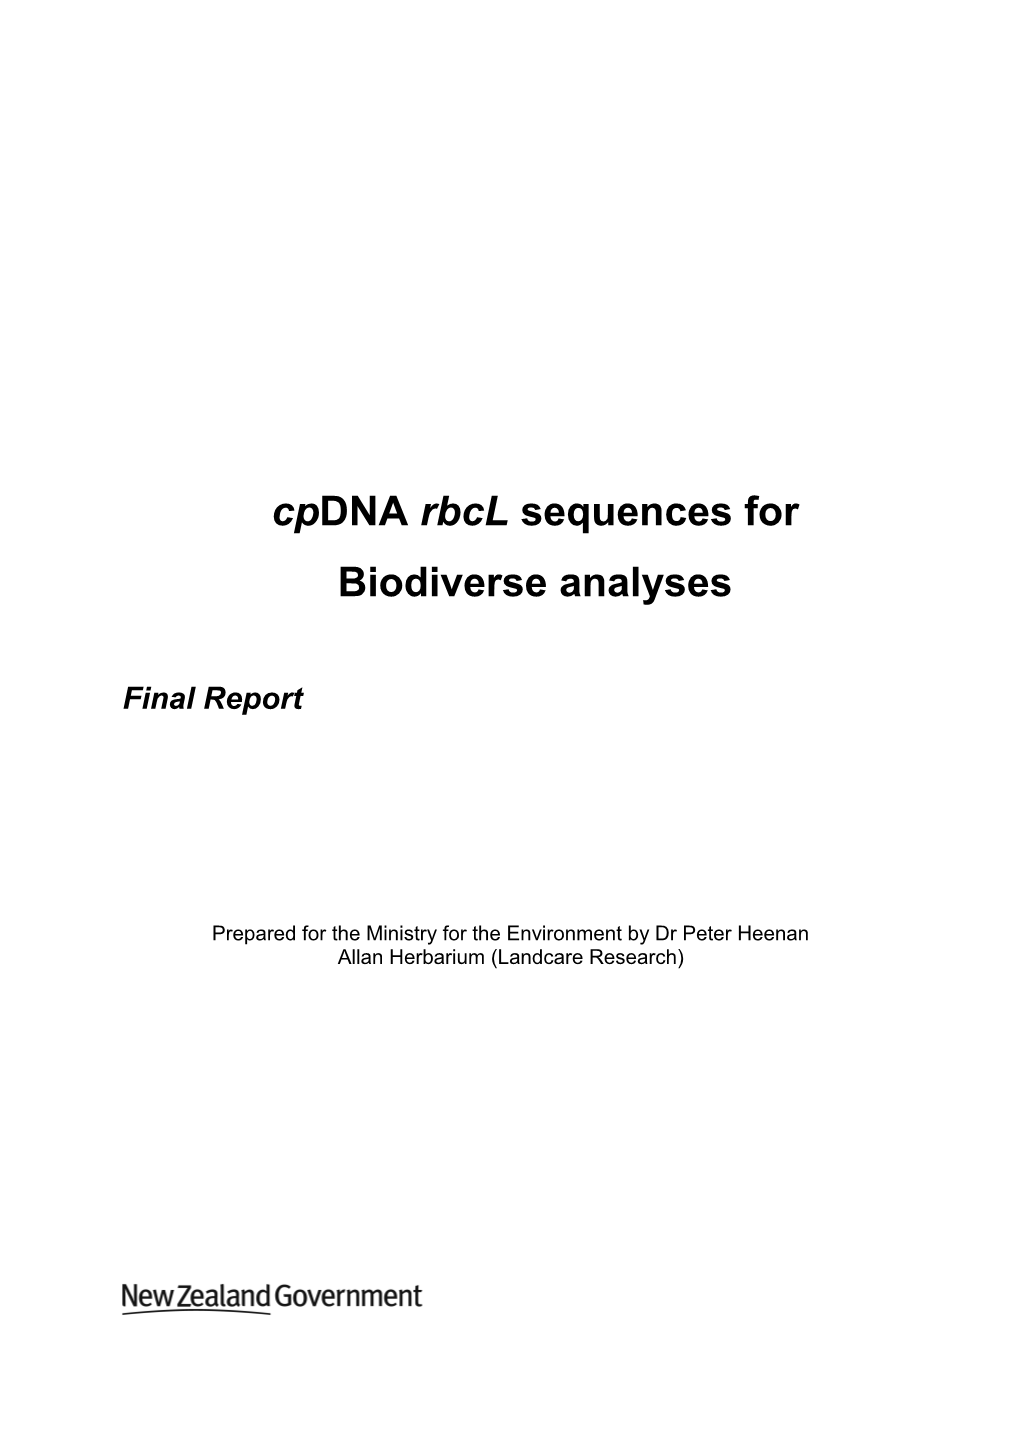 Cpdnarbcl Sequences for Biodiverse Analyses